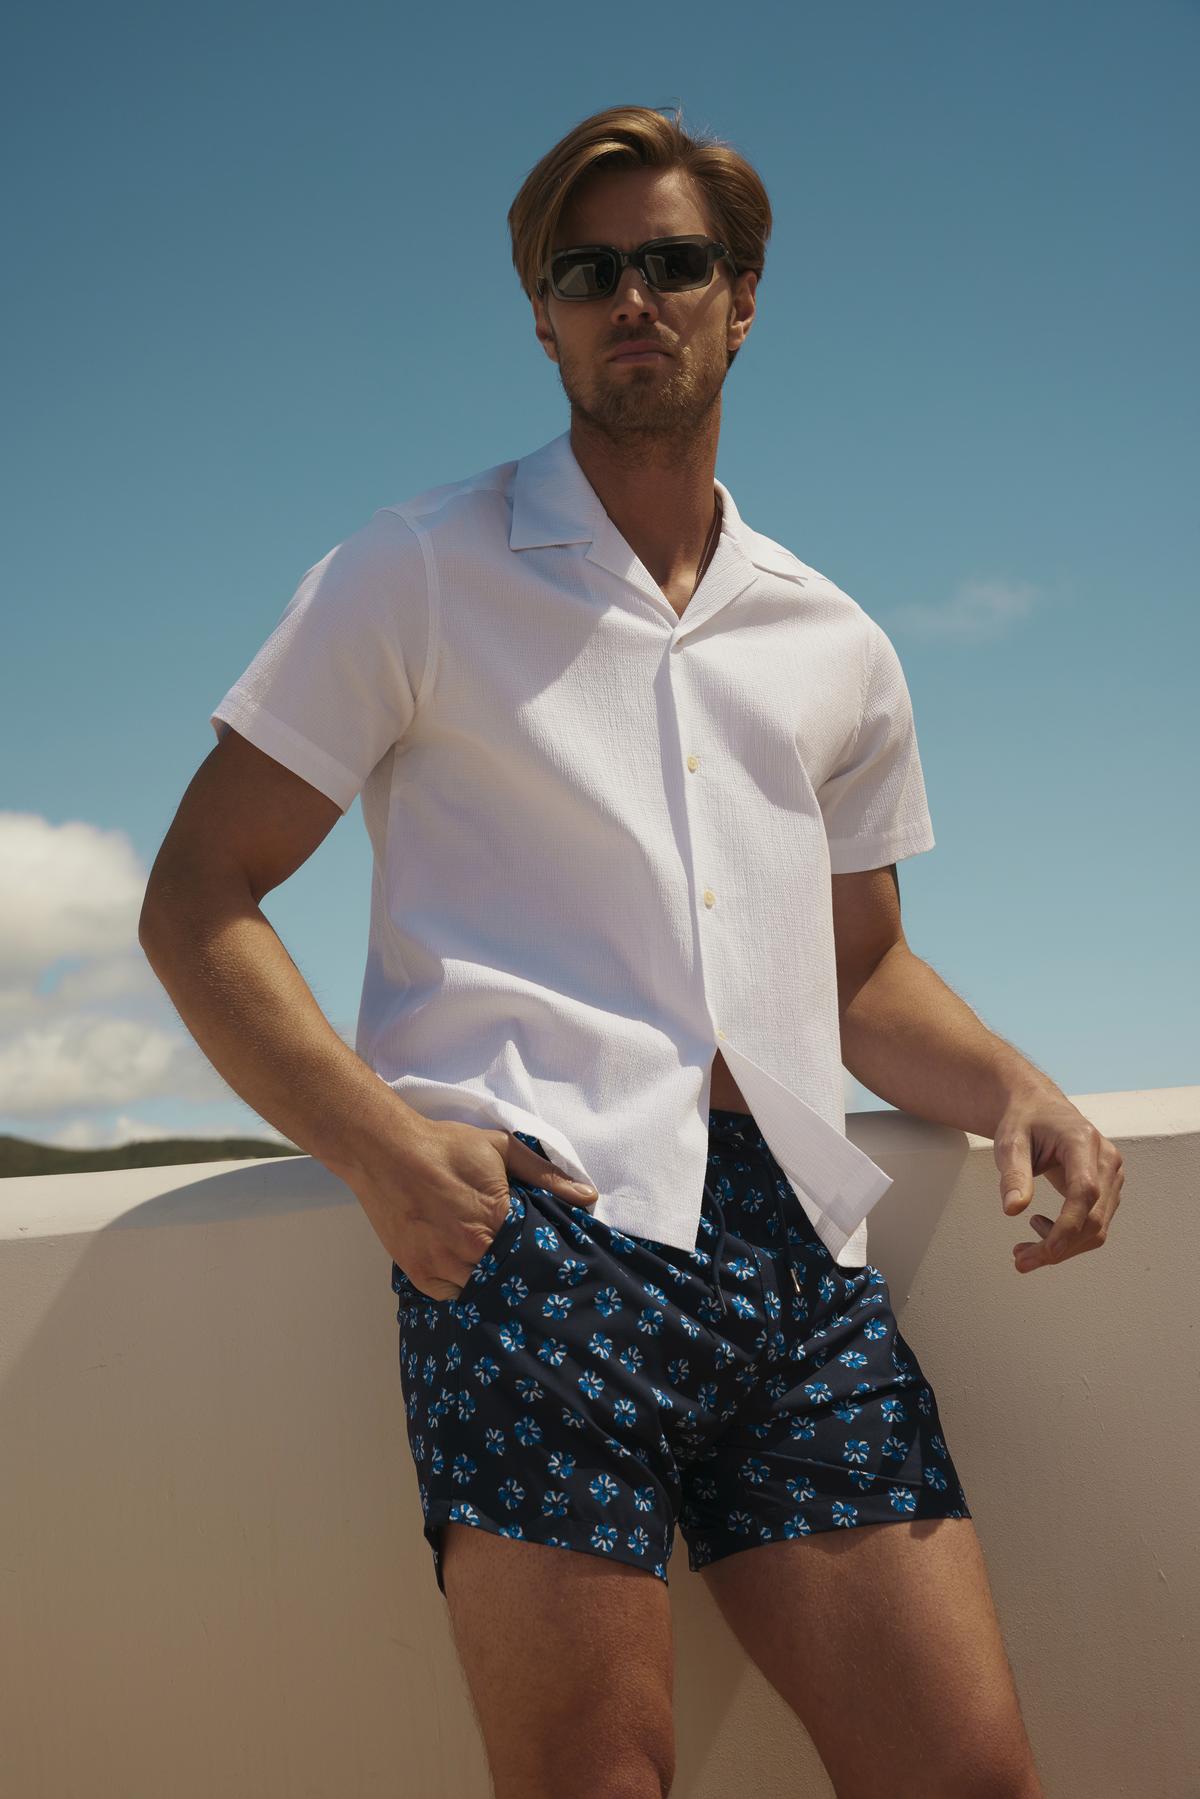 Man in sunglasses, relaxed fit white seersucker cotton FRANK BUTTON-UP SHIRT and printed shorts standing confidently against a clear sky background from Velvet by Graham & Spencer.-36918658859201